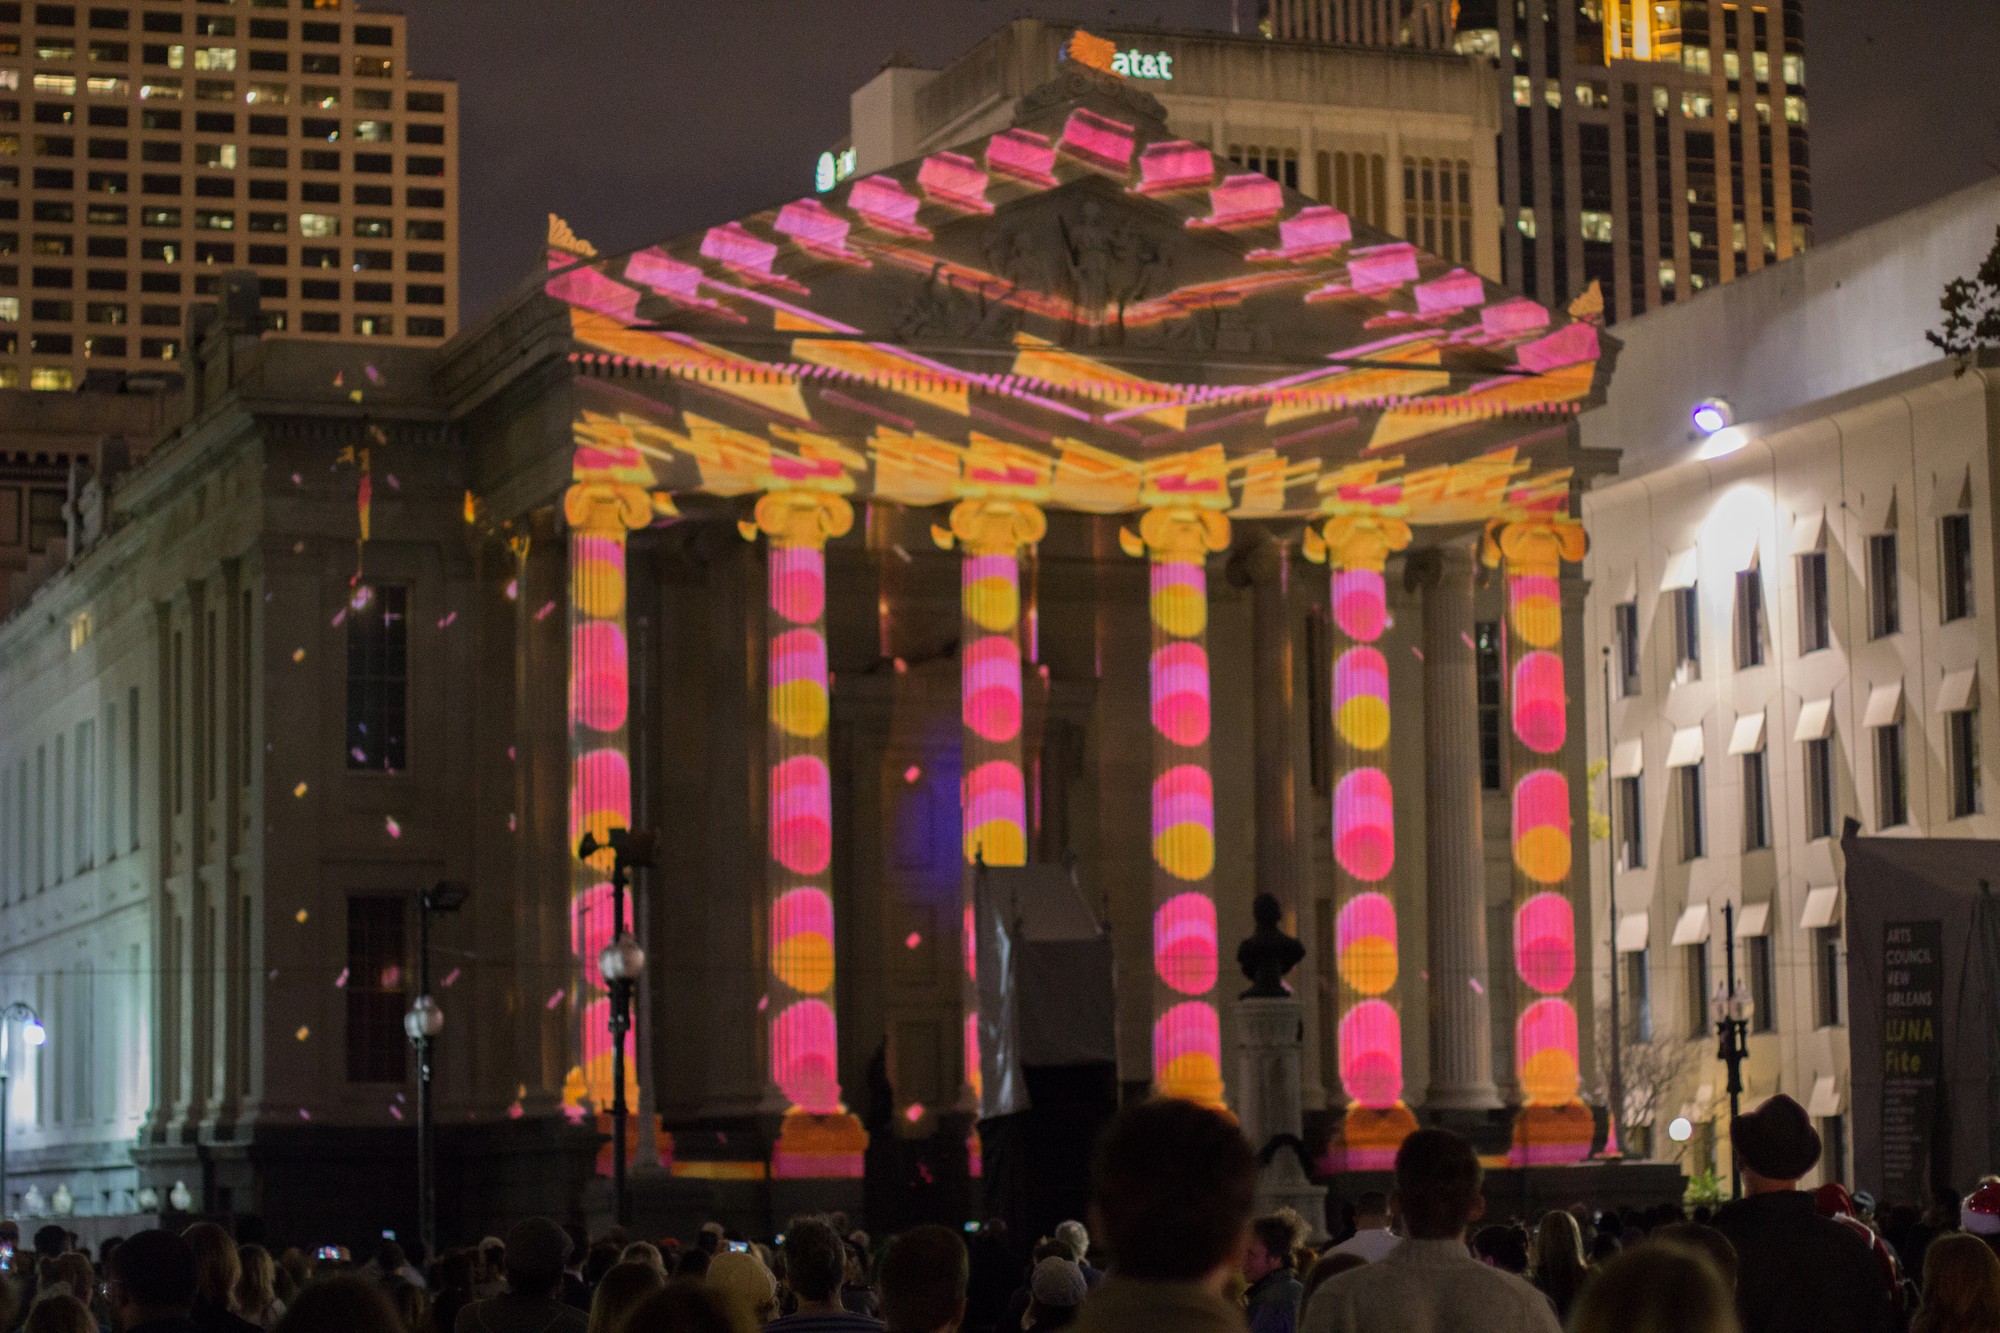 LUNA Fête lights up New Orleans for the holidays The Maroon